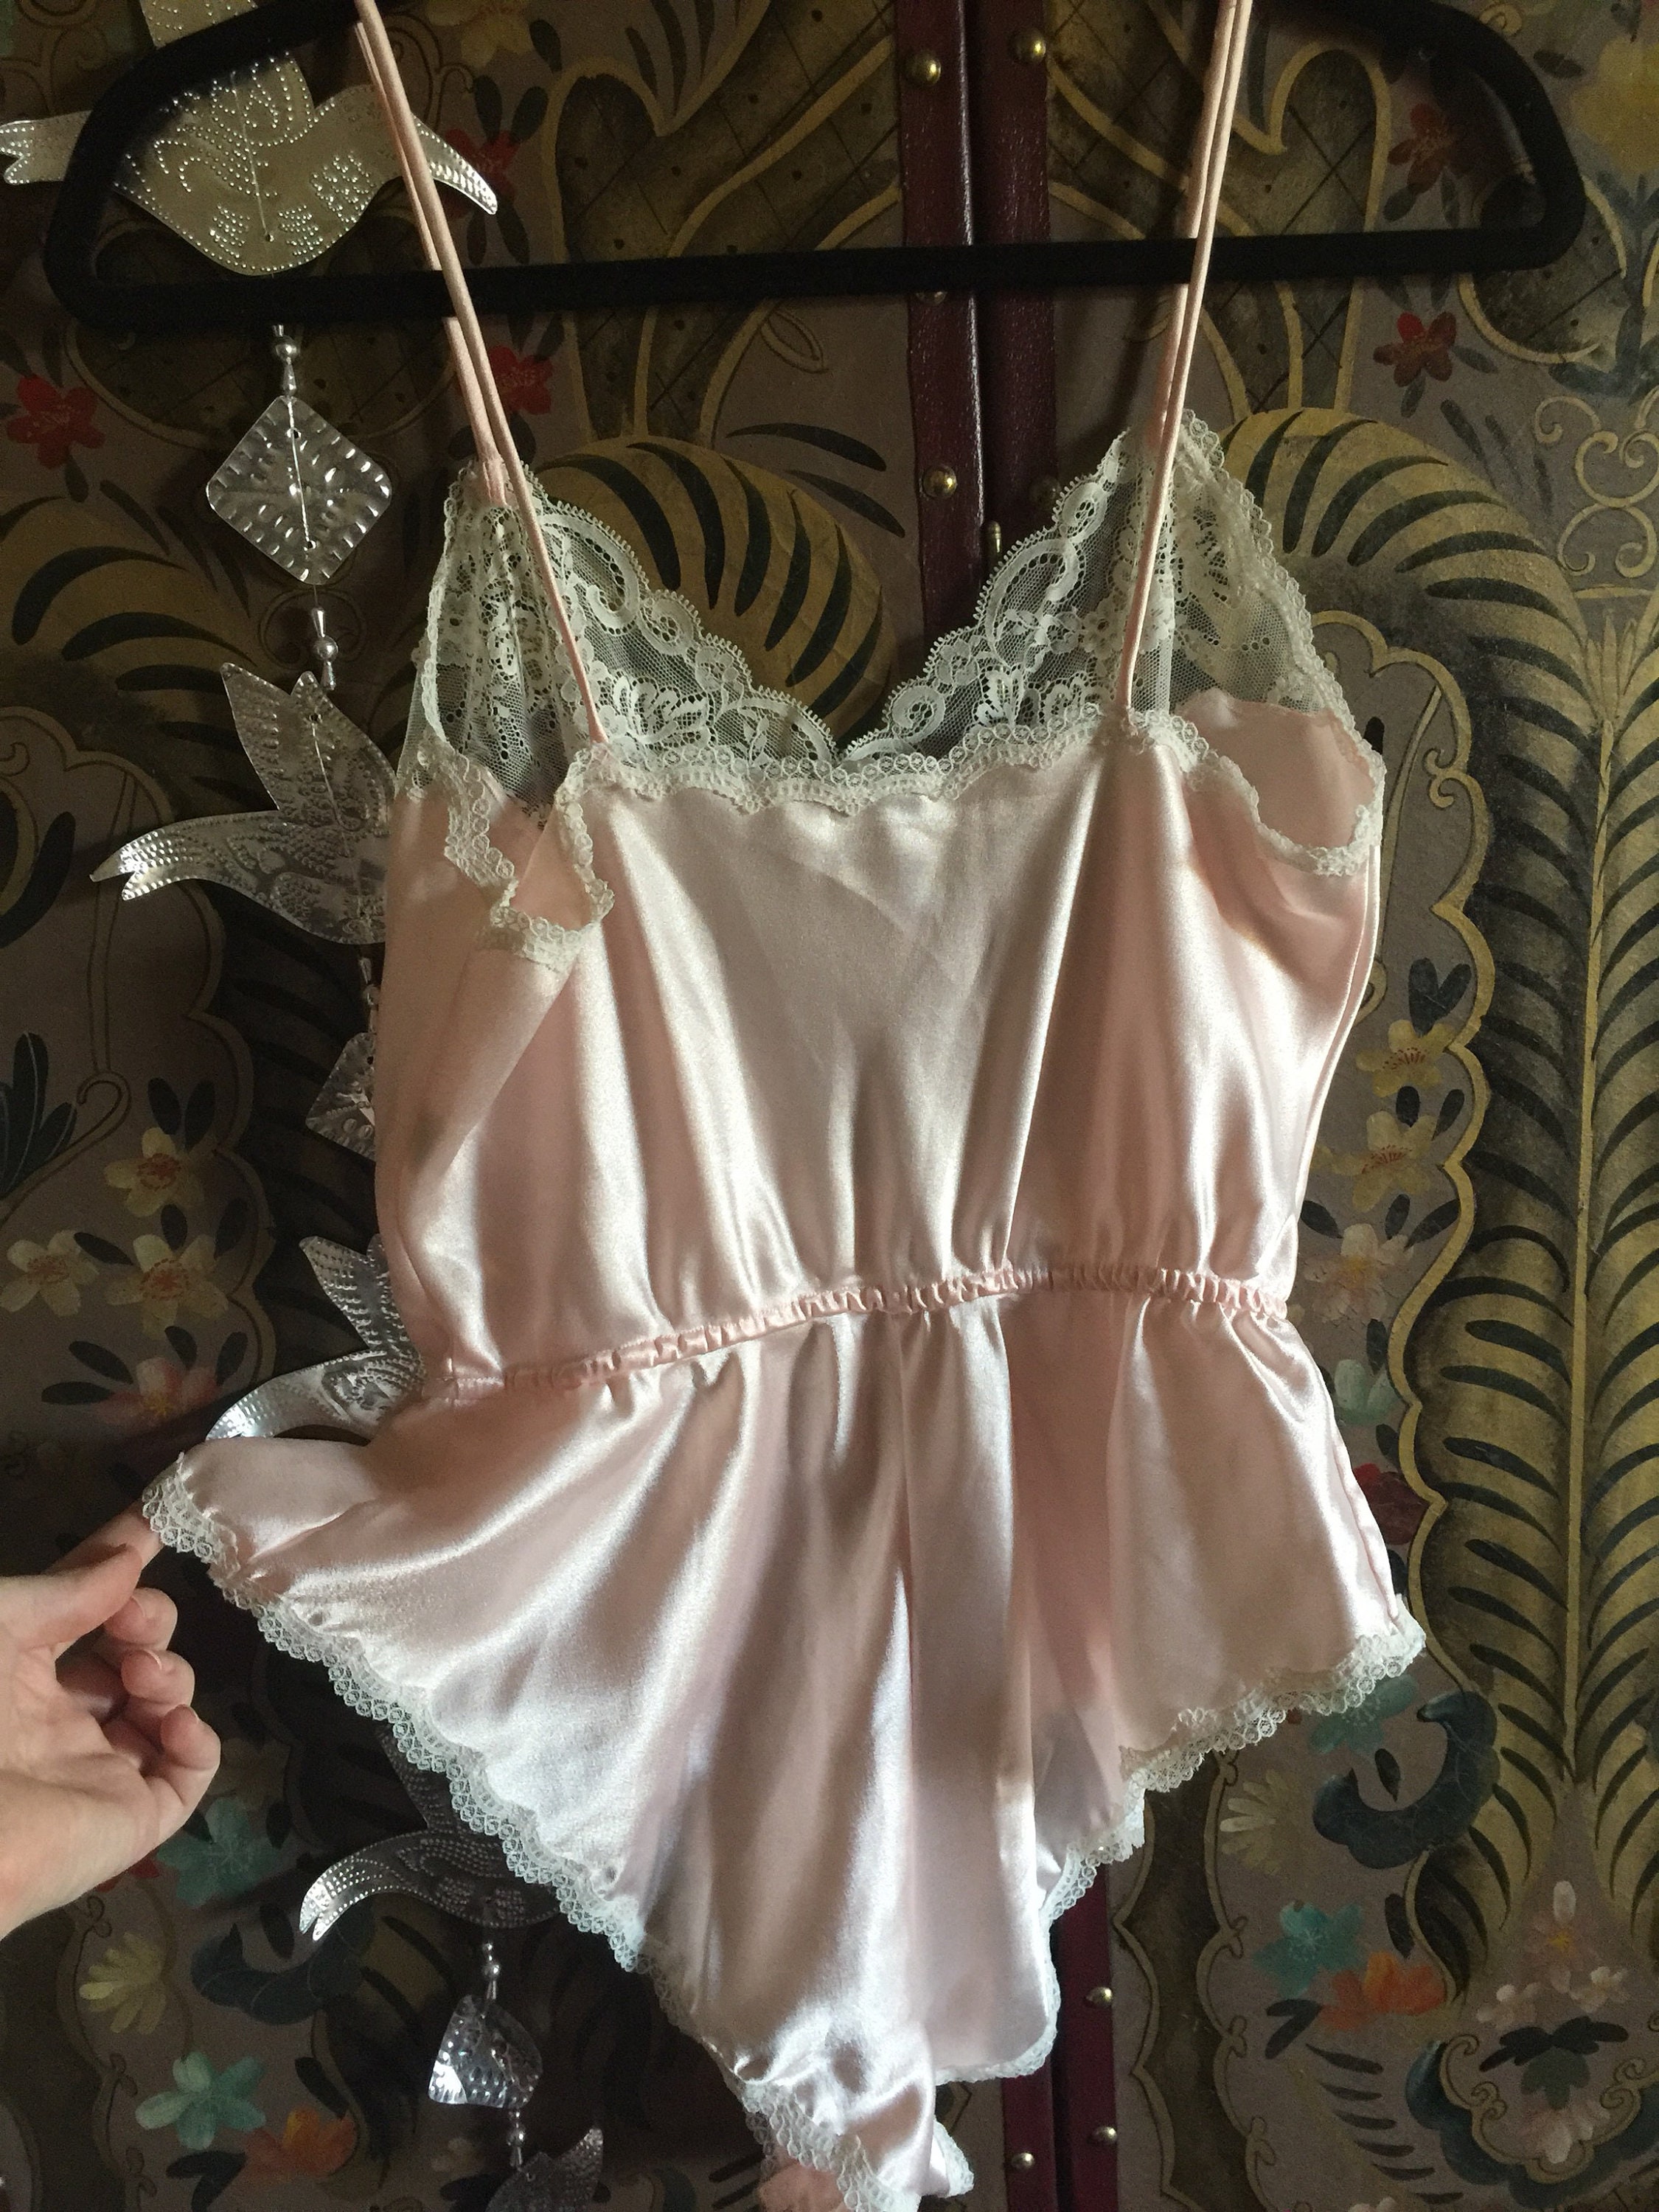 Vintage 'Christian Dior' Designer Pale Pink and White Lace Romper, Lingerie, One Piece